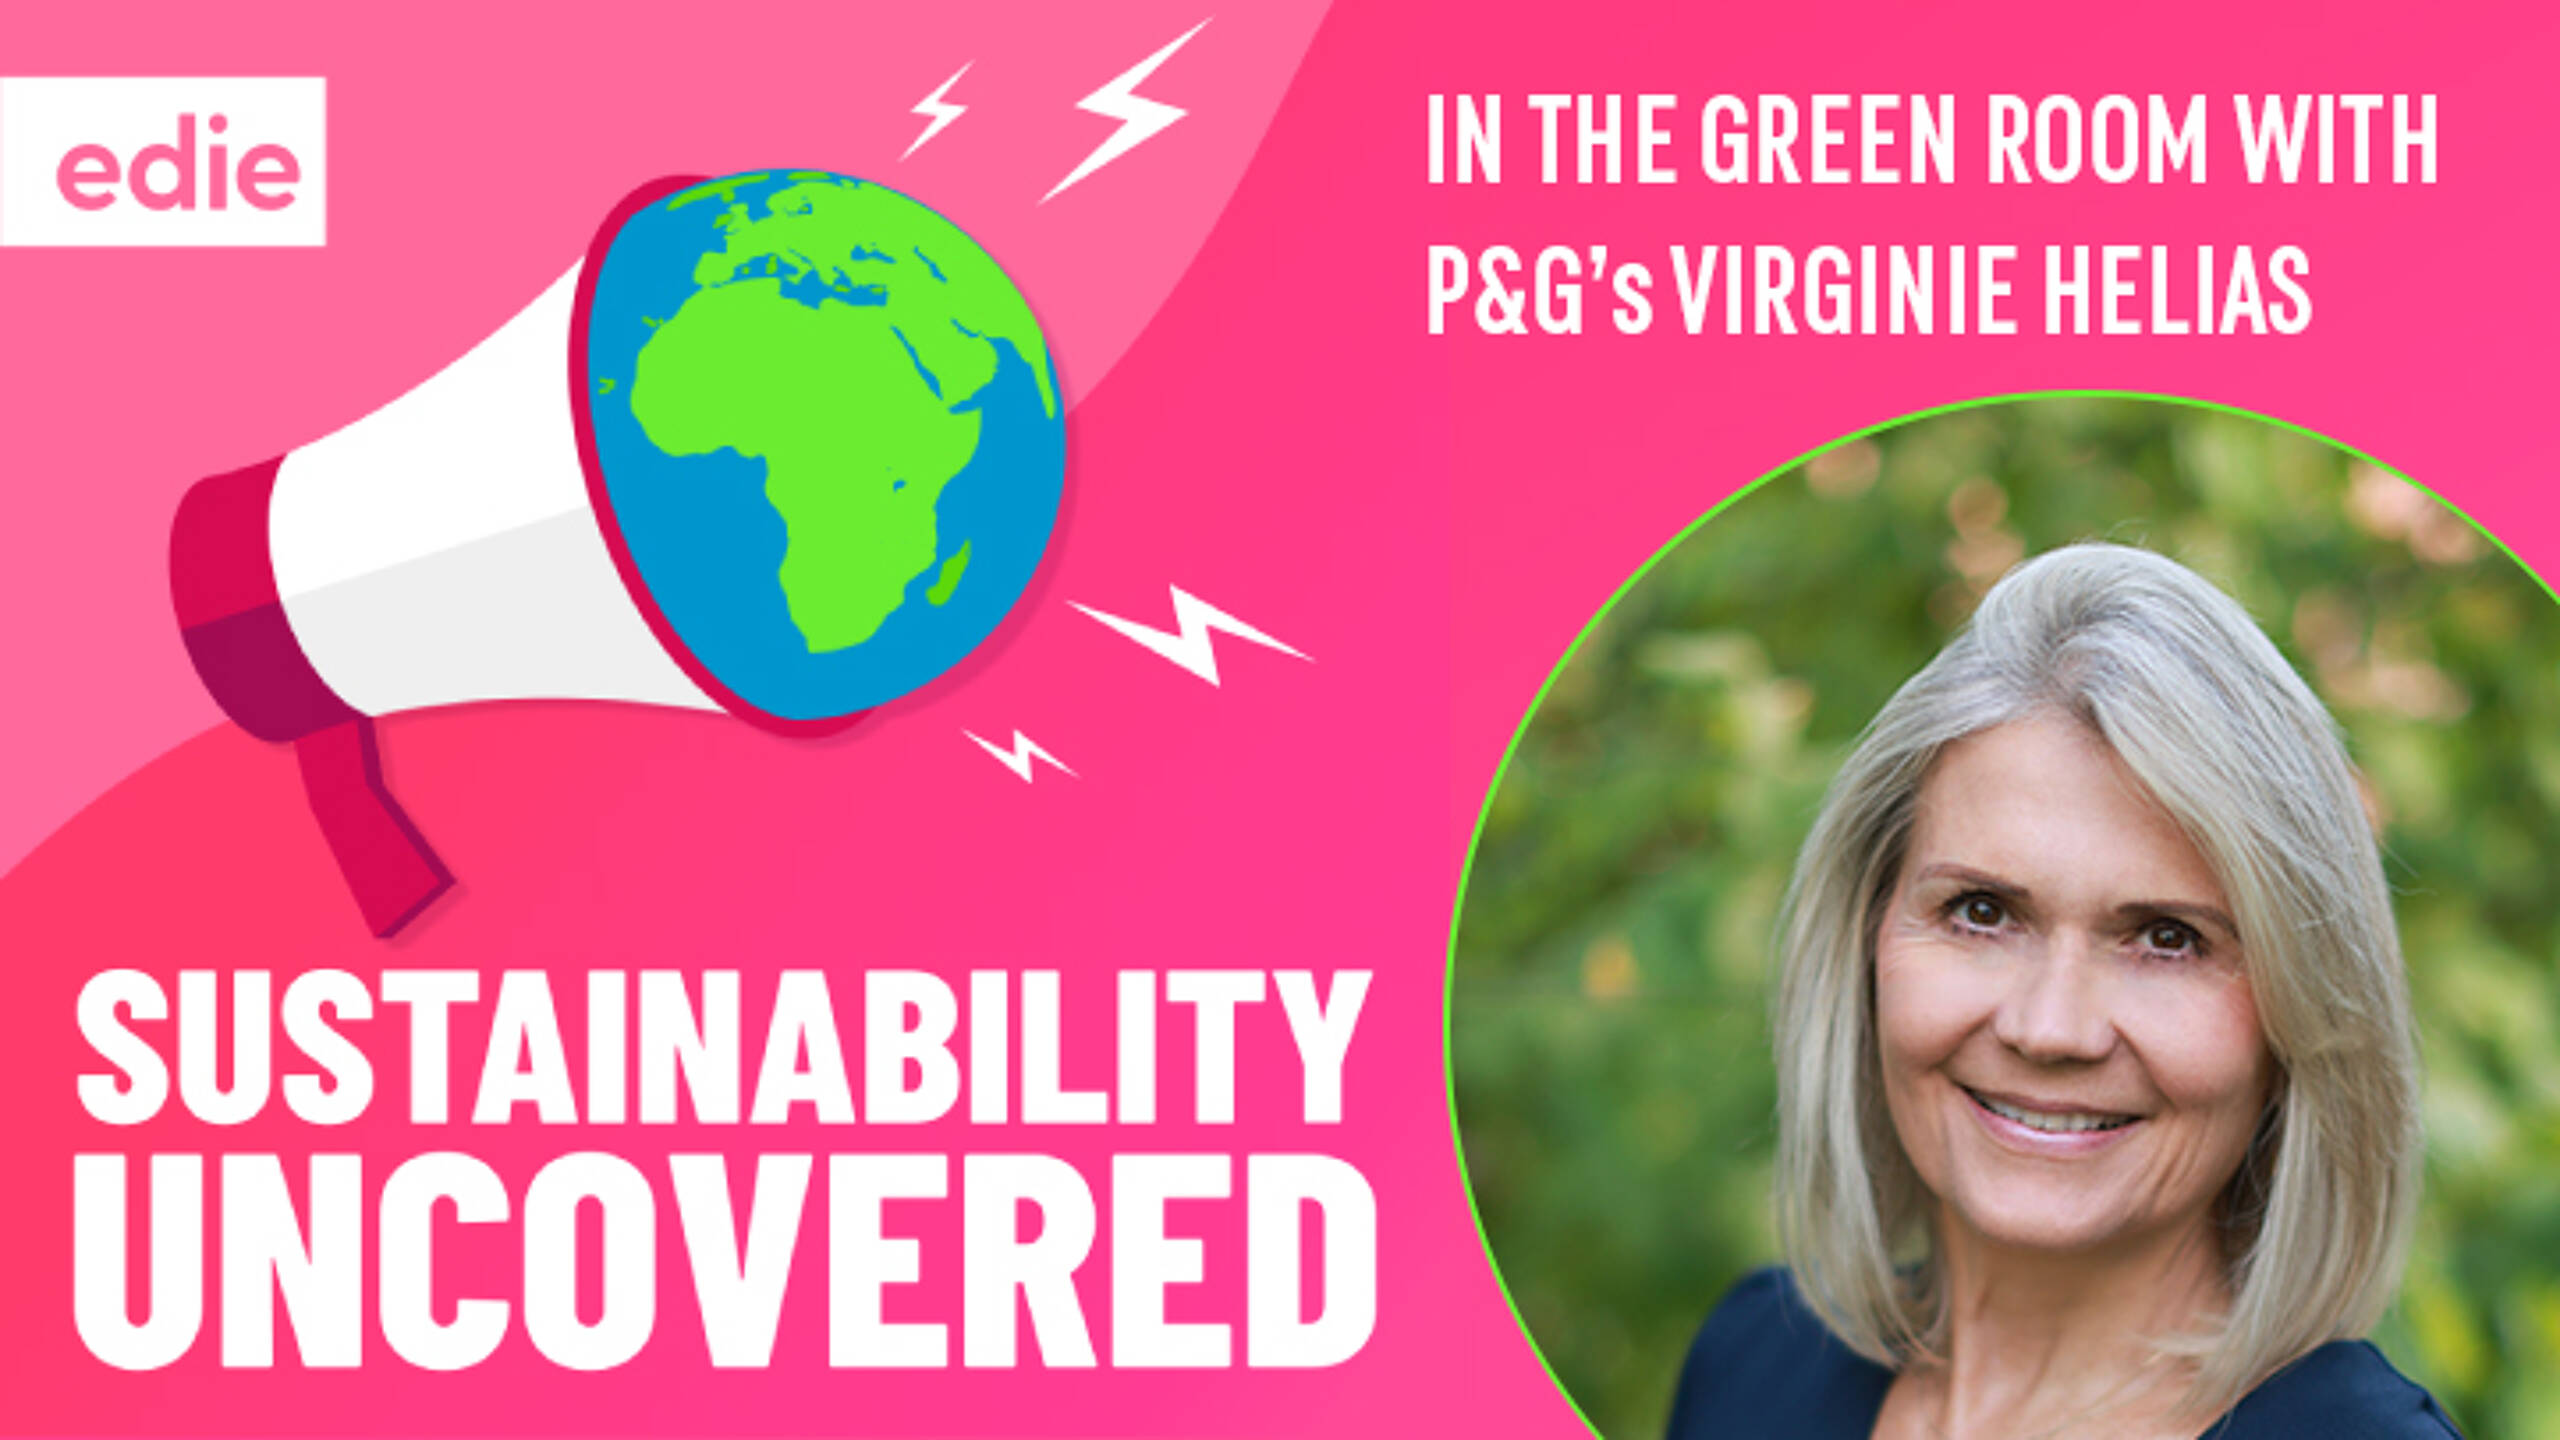 Sustainability Uncovered: In the Green Room with P&G’s Chief Sustainability Officer Virginie Helias